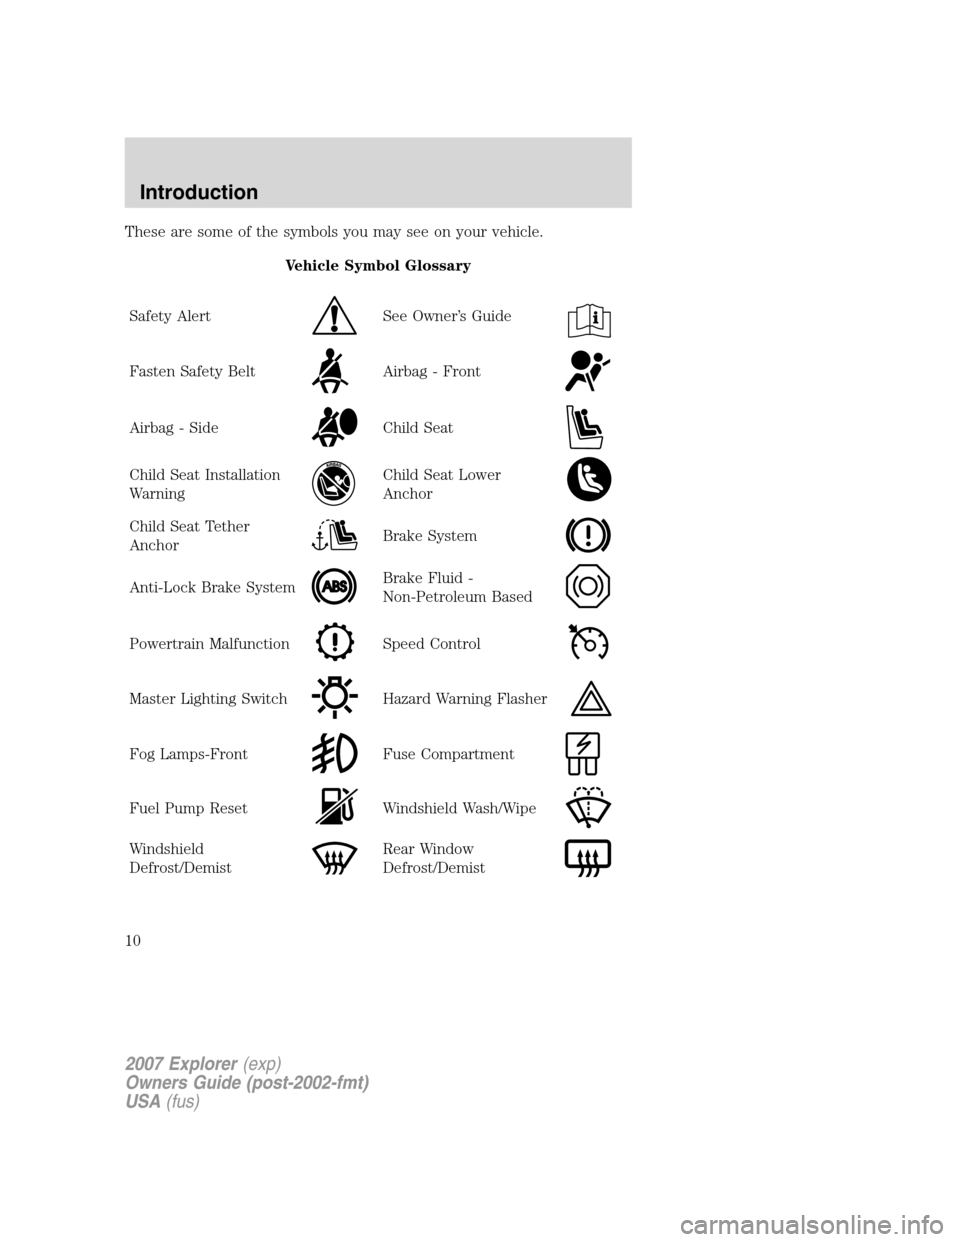 FORD EXPLORER 2007 4.G Owners Manual These are some of the symbols you may see on your vehicle.
Vehicle Symbol Glossary
Safety Alert
See Owner’s Guide
Fasten Safety BeltAirbag - Front
Airbag - SideChild Seat
Child Seat Installation
War